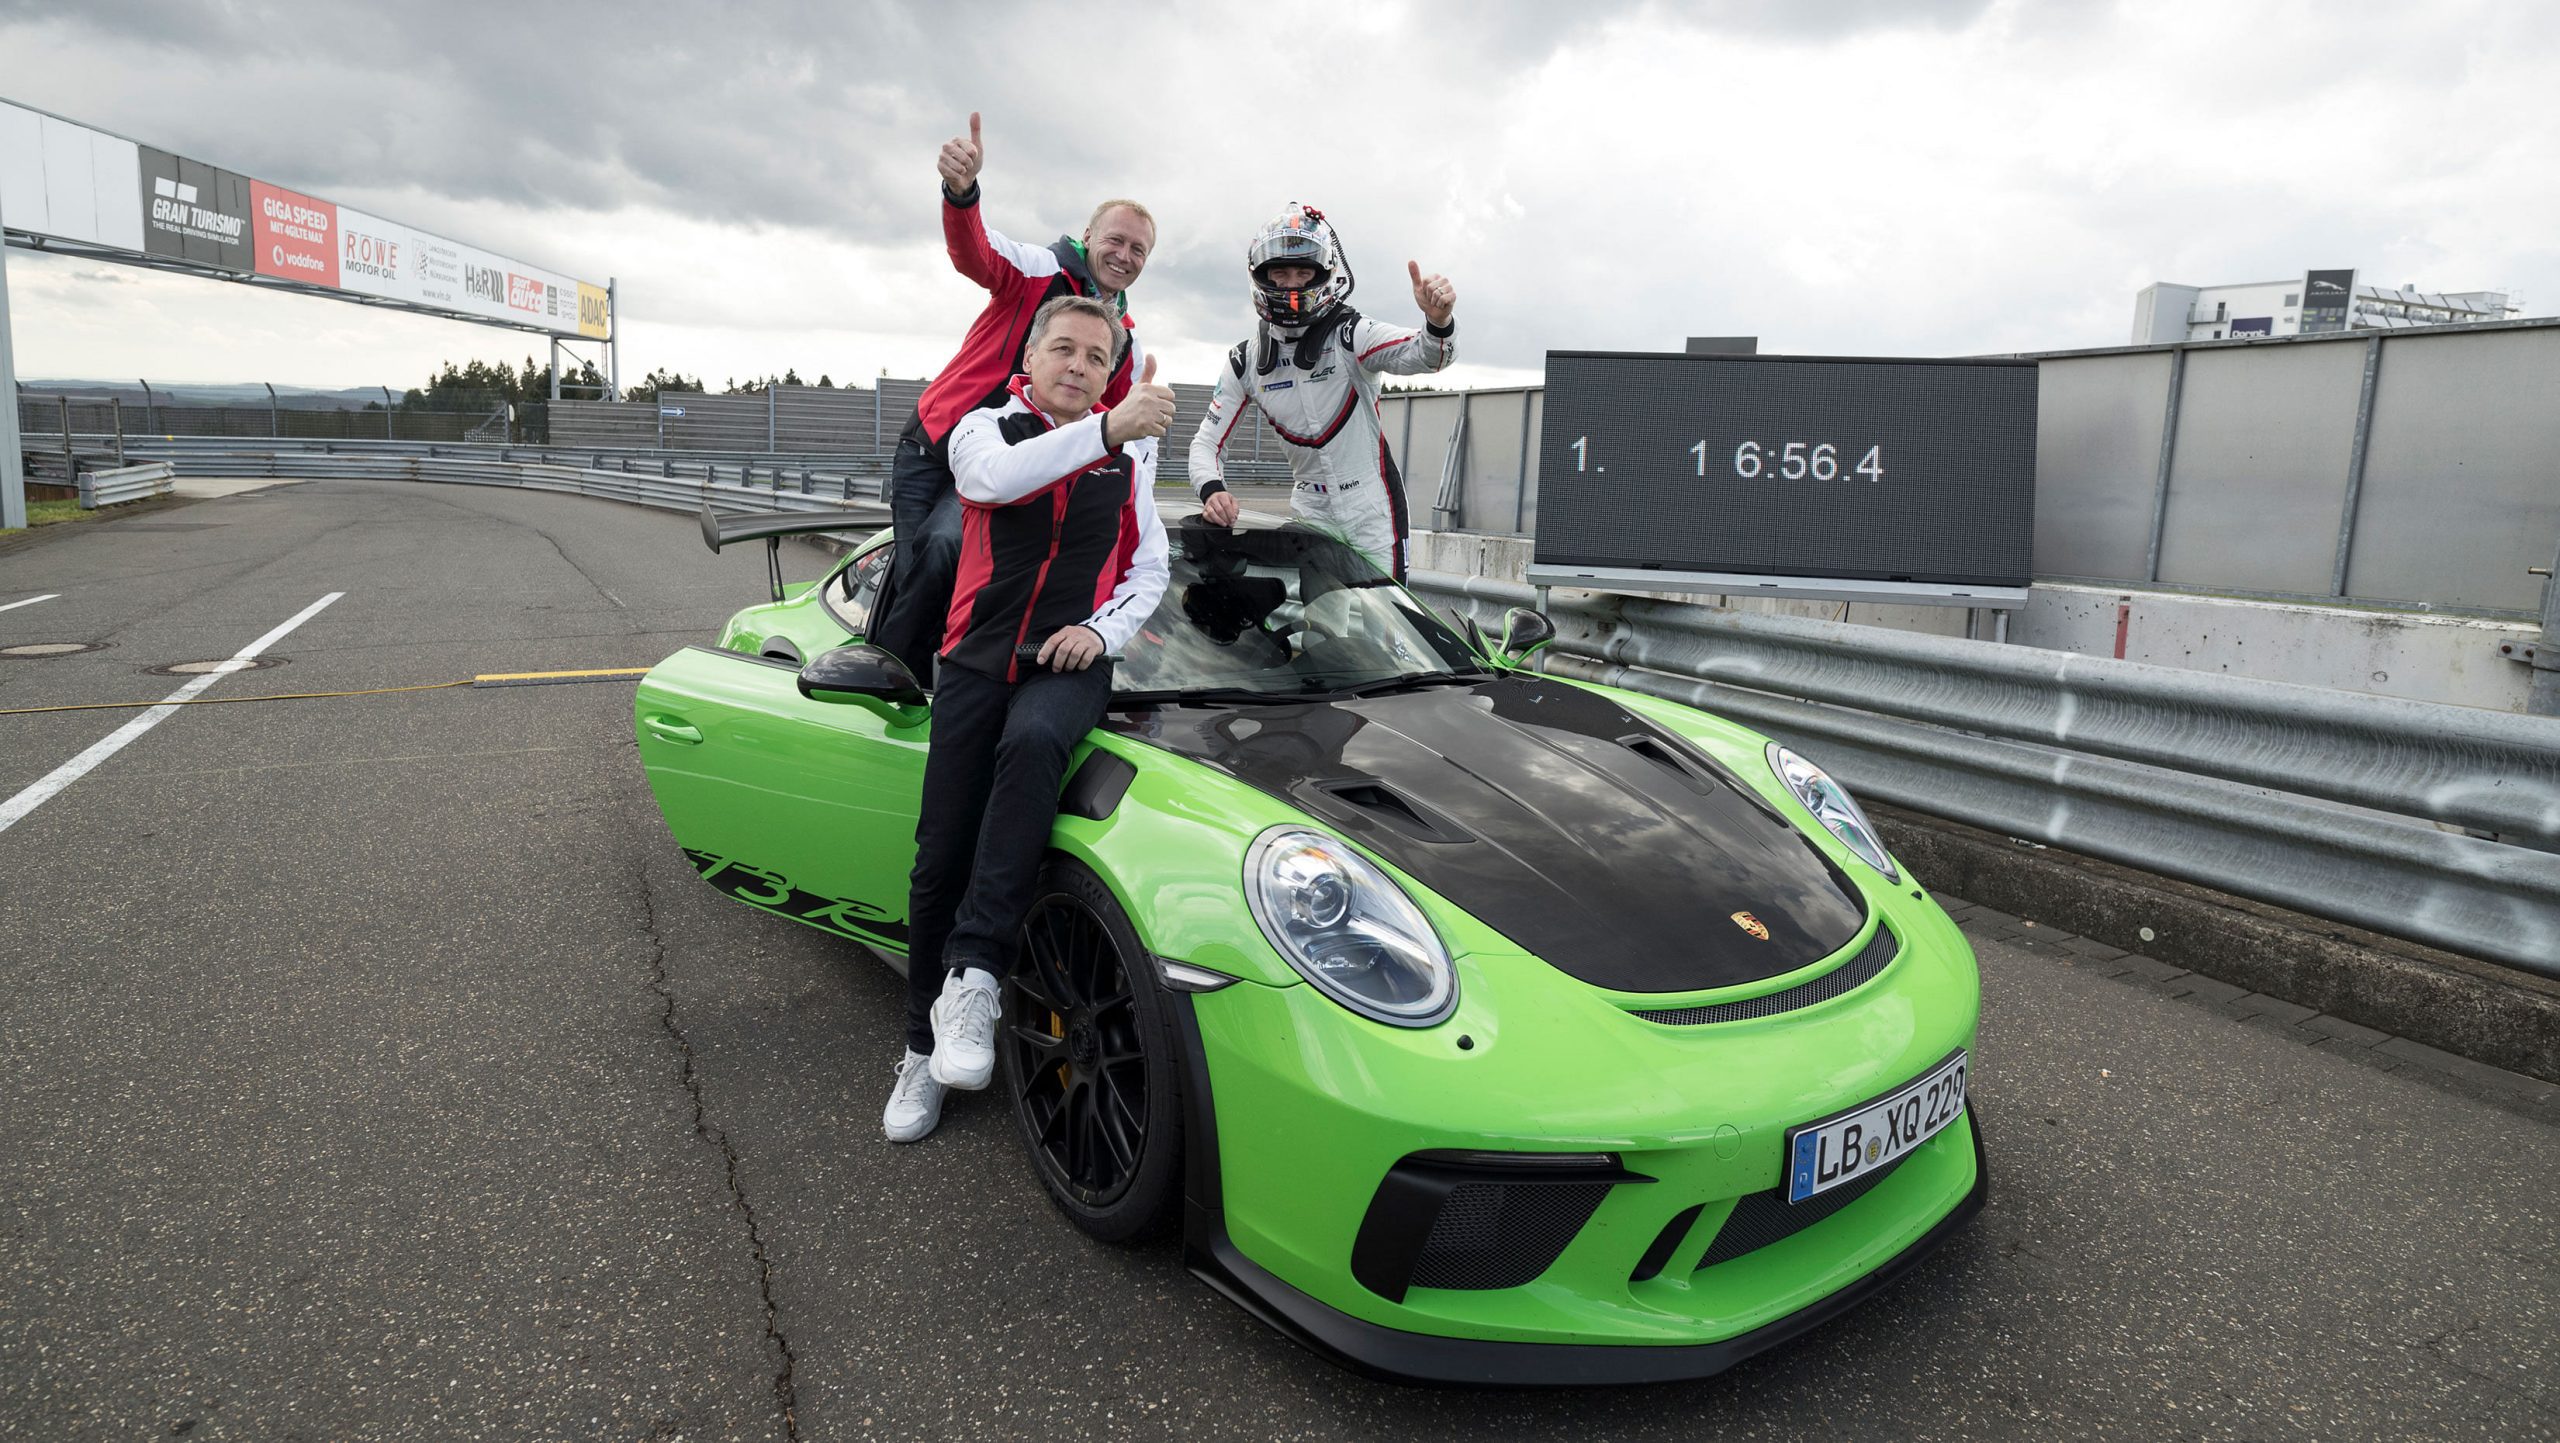 2019 Porsche 911 GT3 RS (991.2) with the driver and pit crew